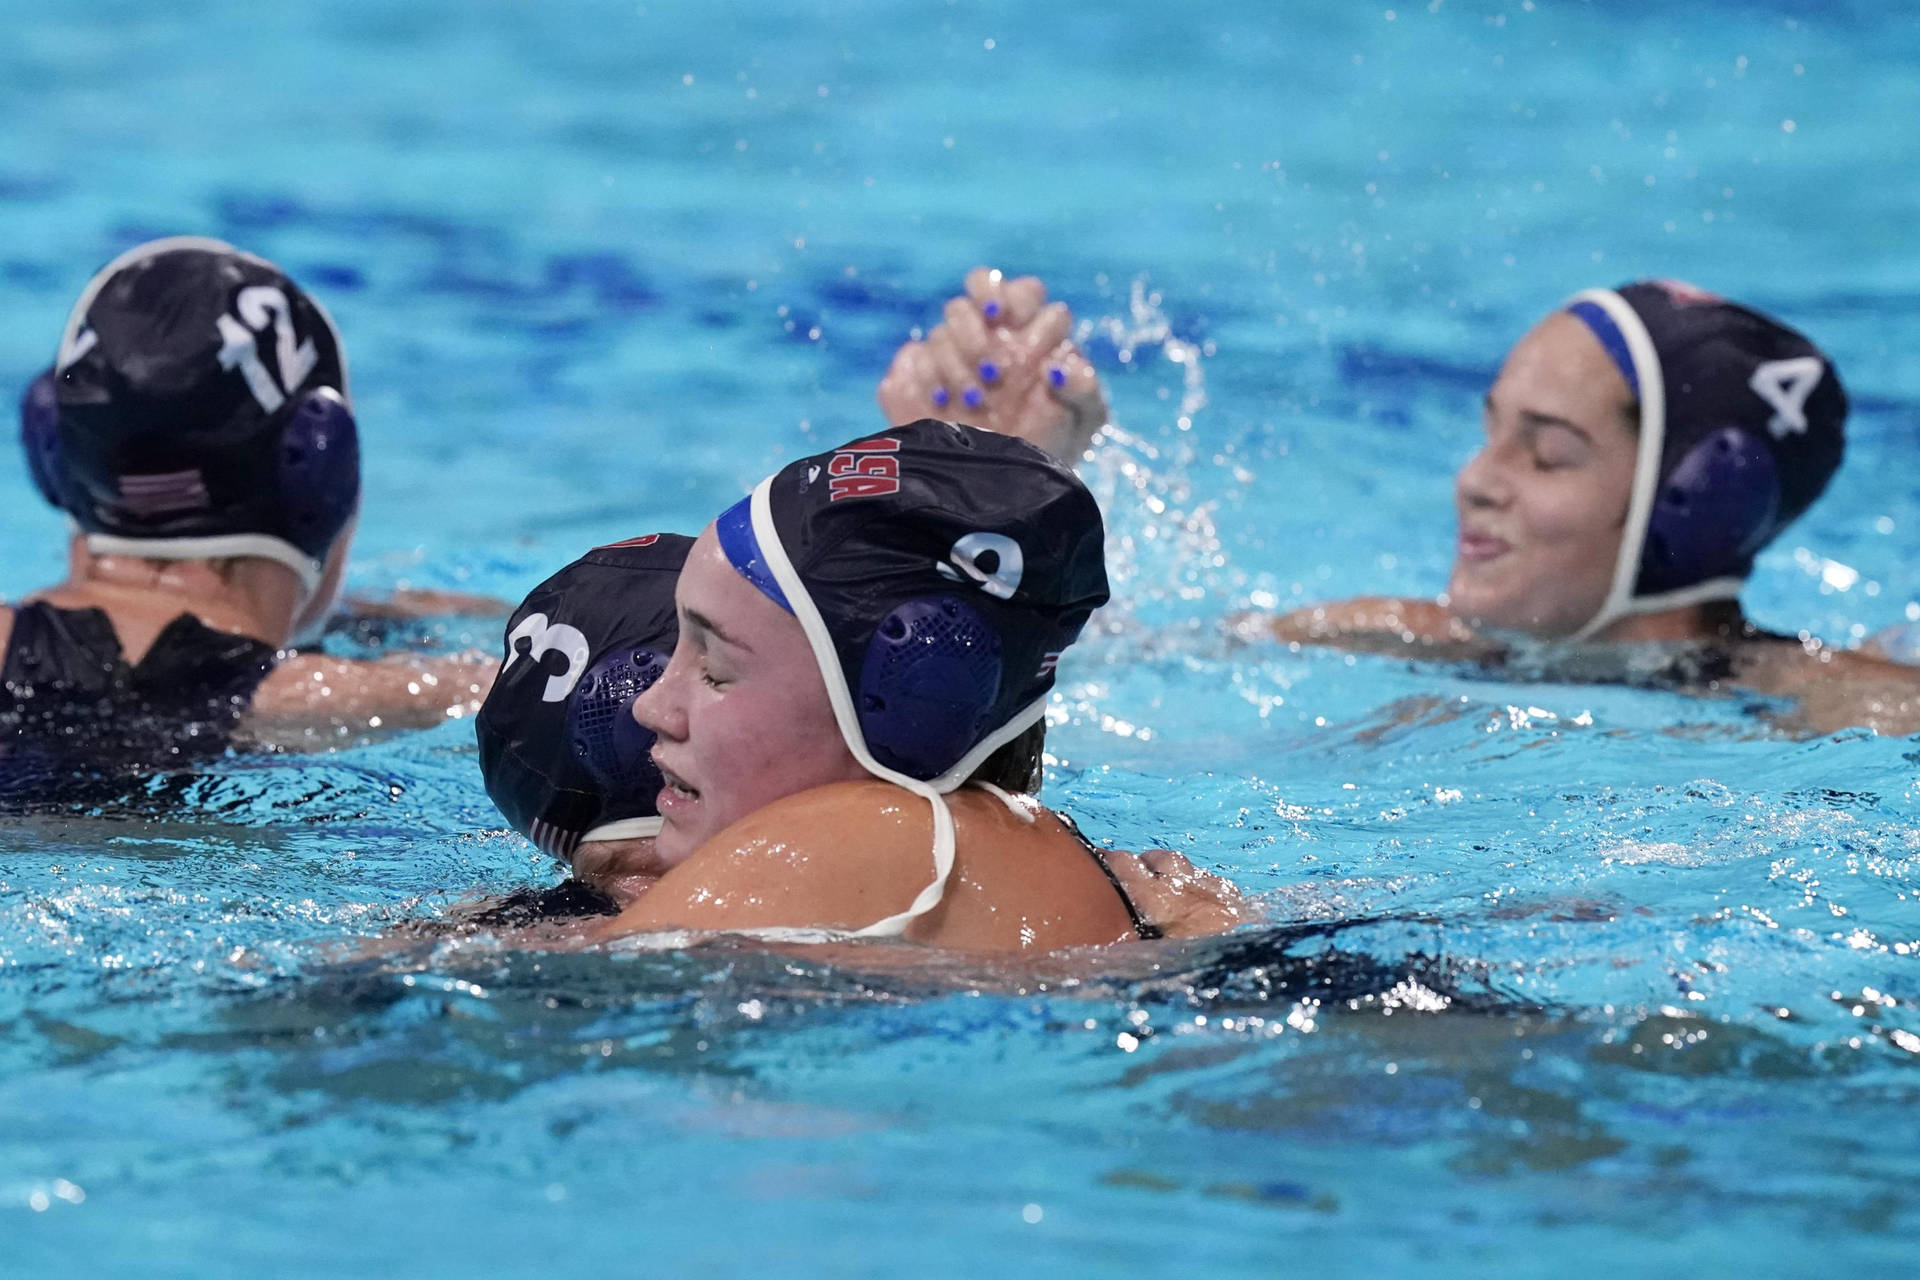 All Female Water Polo Team Wallpaper